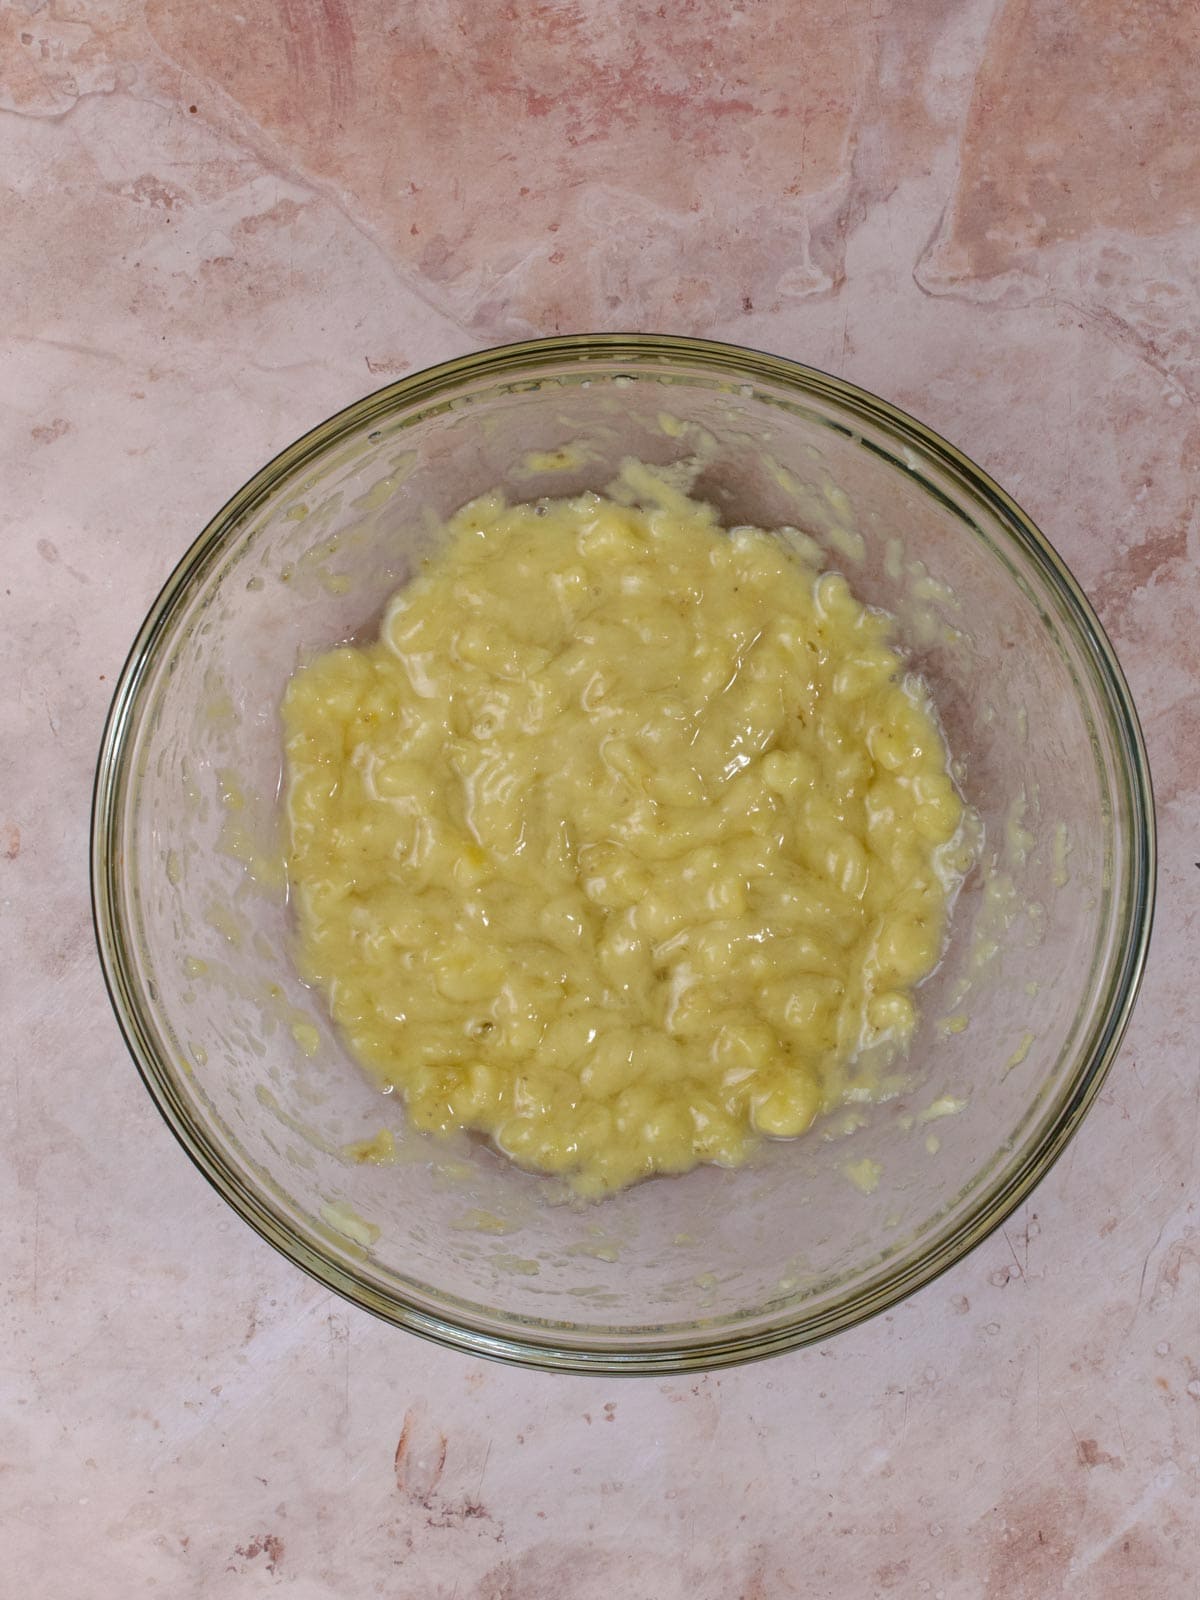 mashed banana in a glass bowl